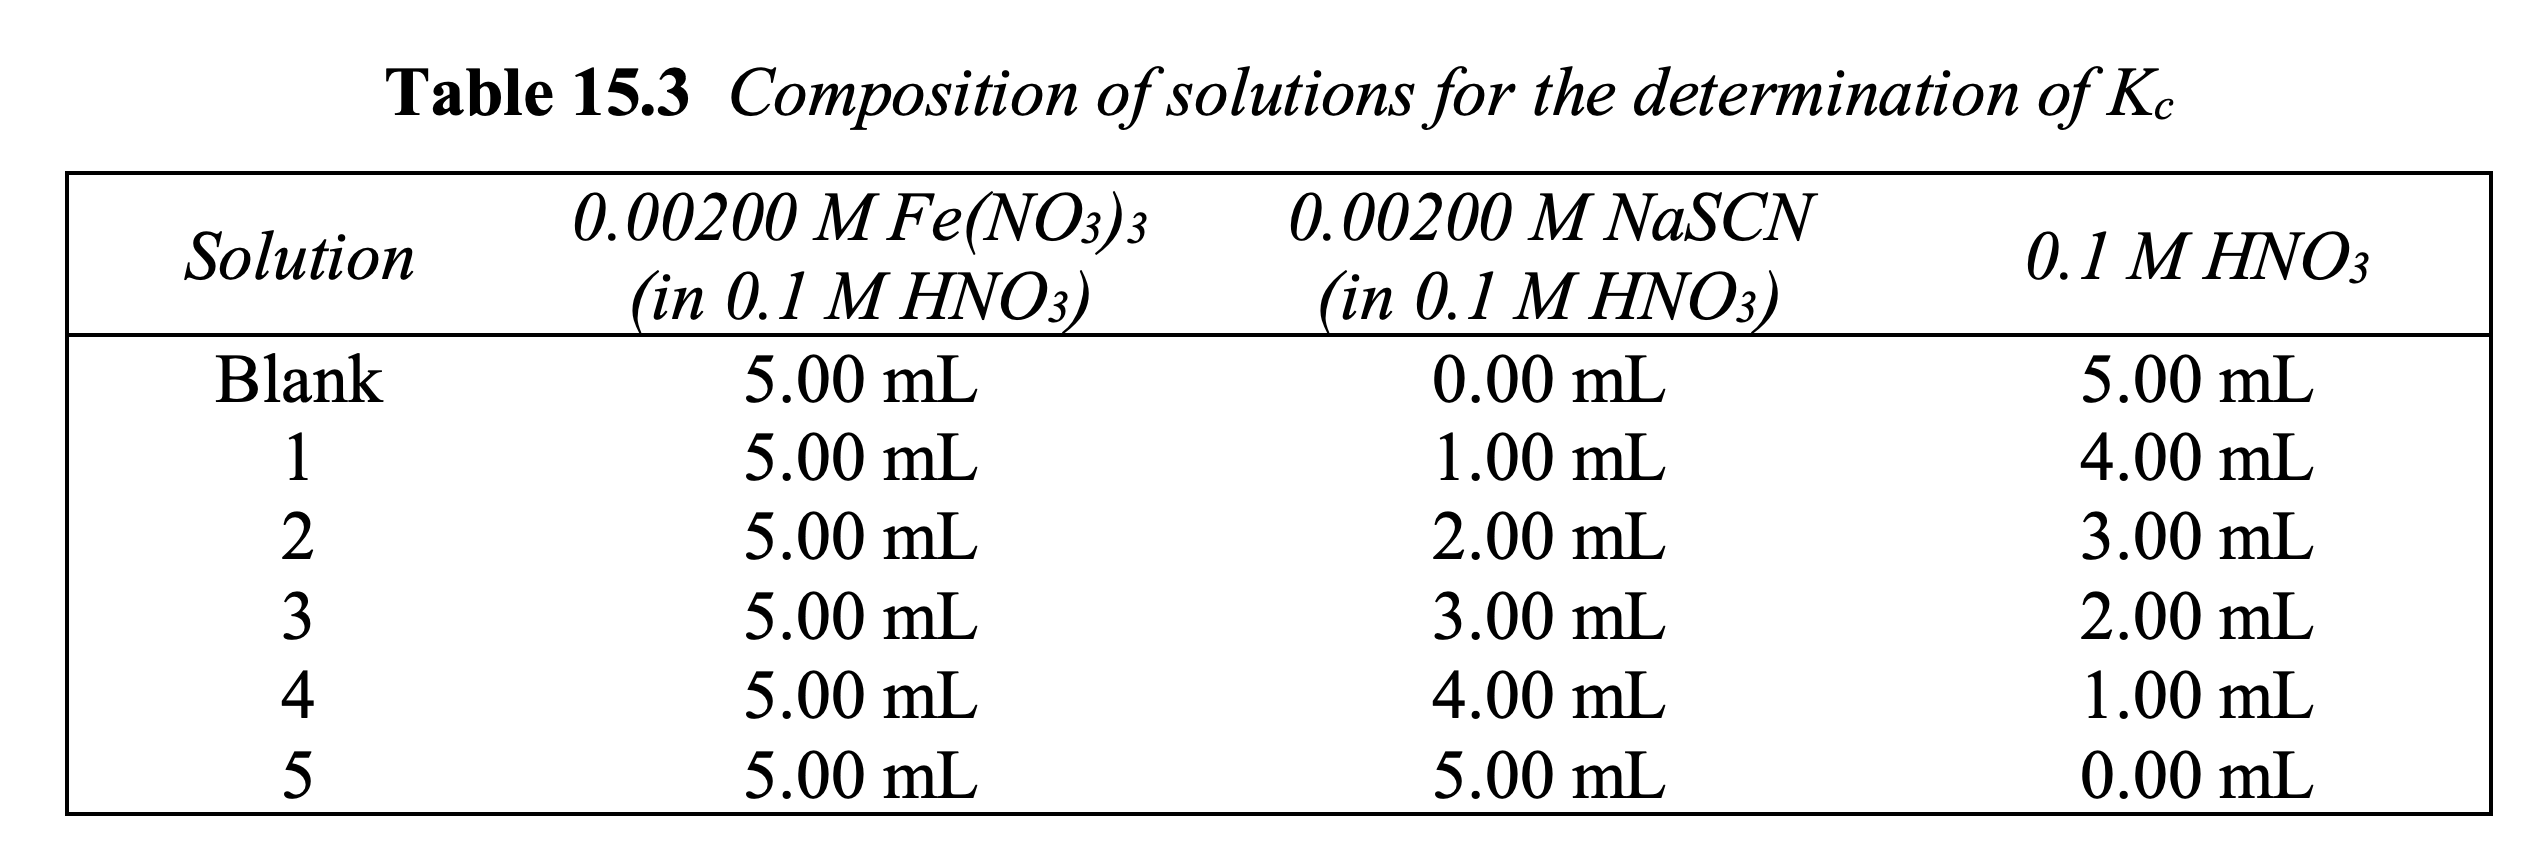 Table 15.3 Composition of solutions for the determination of Kc
0.00200 M Fe(NO3)3
(in 0.1 M HNO3)
0.00200 M NaSCN
(in 0.1 M HNO3)
Solution
0.1 M HNO3
Blank
5.00 mL
0.00 mL
5.00 mL
1
5.00 mL
1.00 mL
4.00 mL
2
5.00 mL
2.00 mL
3.00 mL
3
5.00 mL
3.00 mL
2.00 mL
5.00 mL
4.00 mL
1.00 mL
5.00 mL
5.00 mL
0.00 mL
